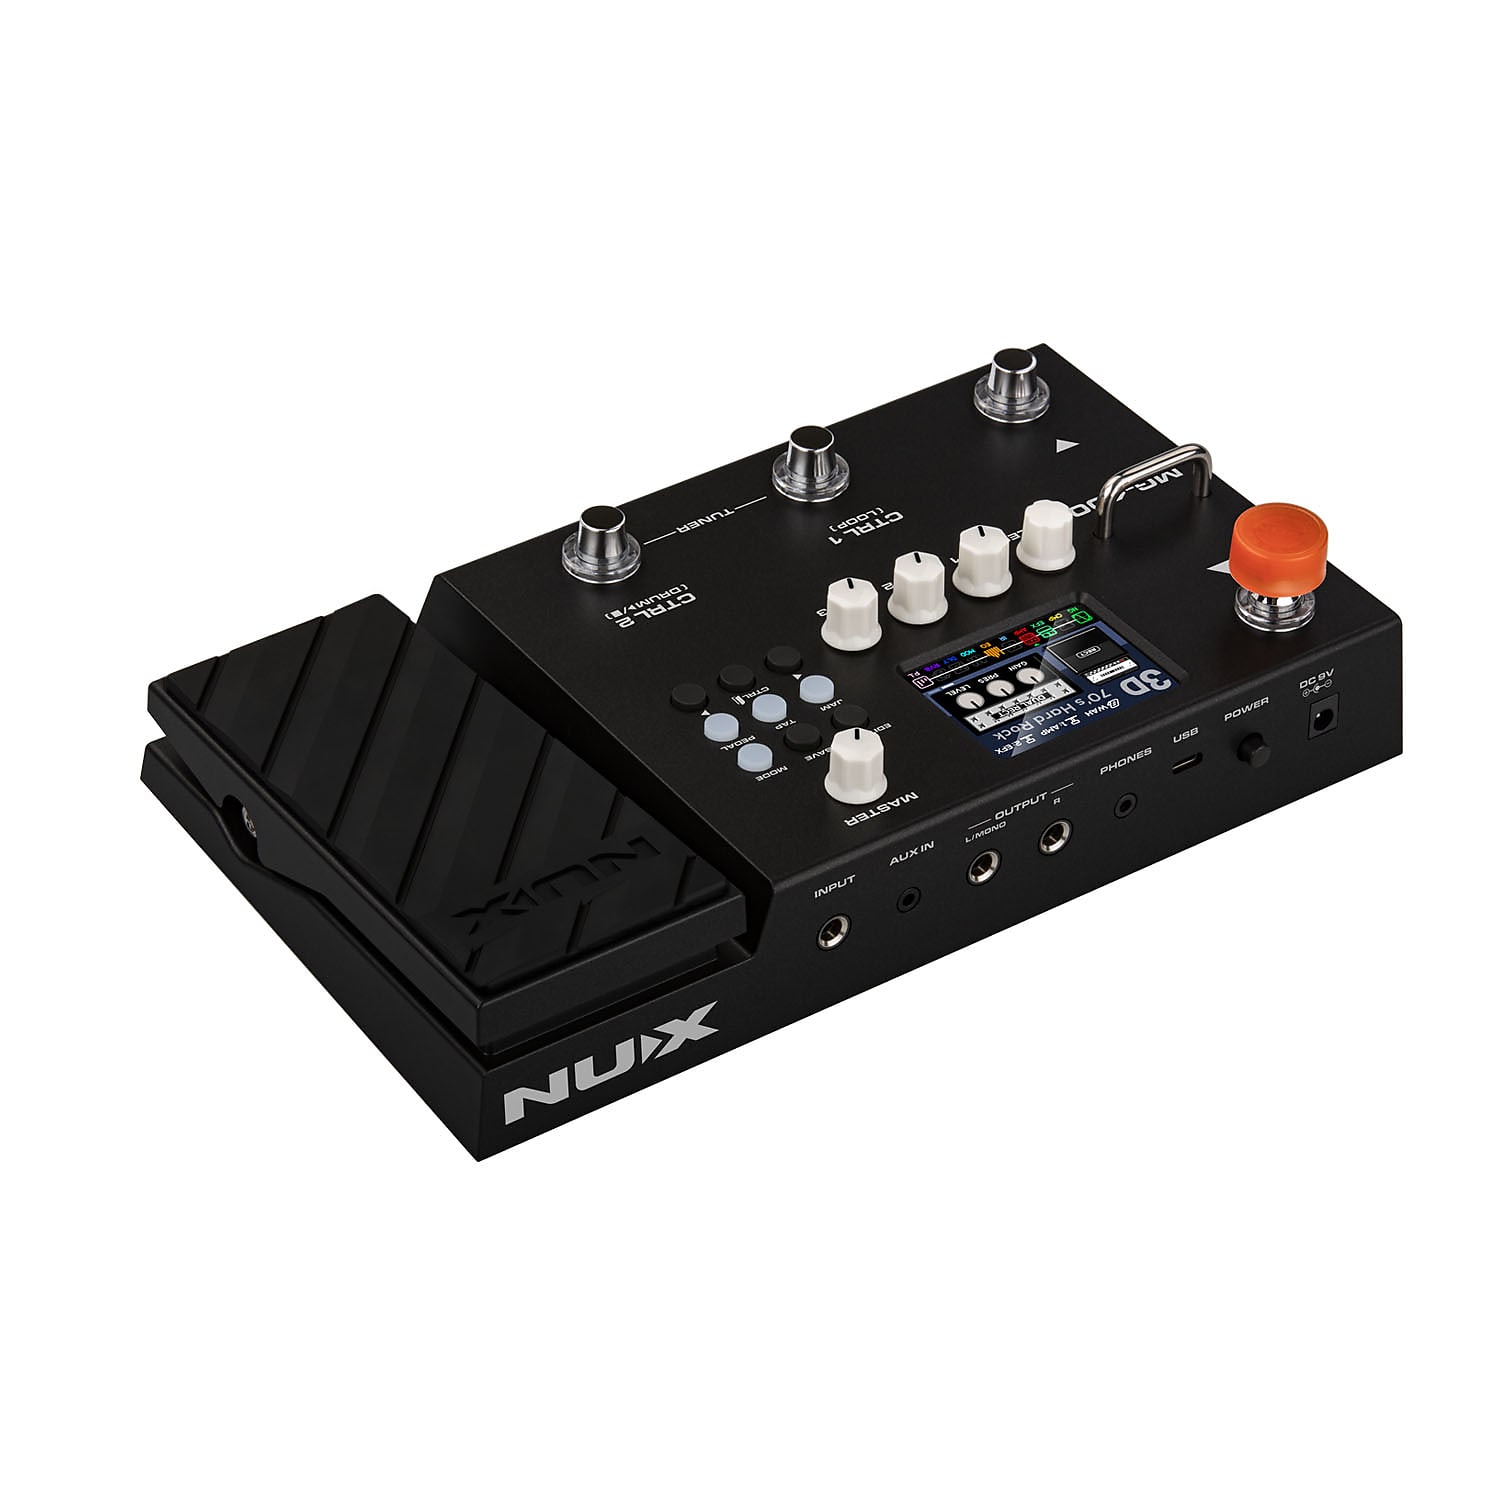 NuX MG-400 Modeling Multi-Effects Processor Pedal